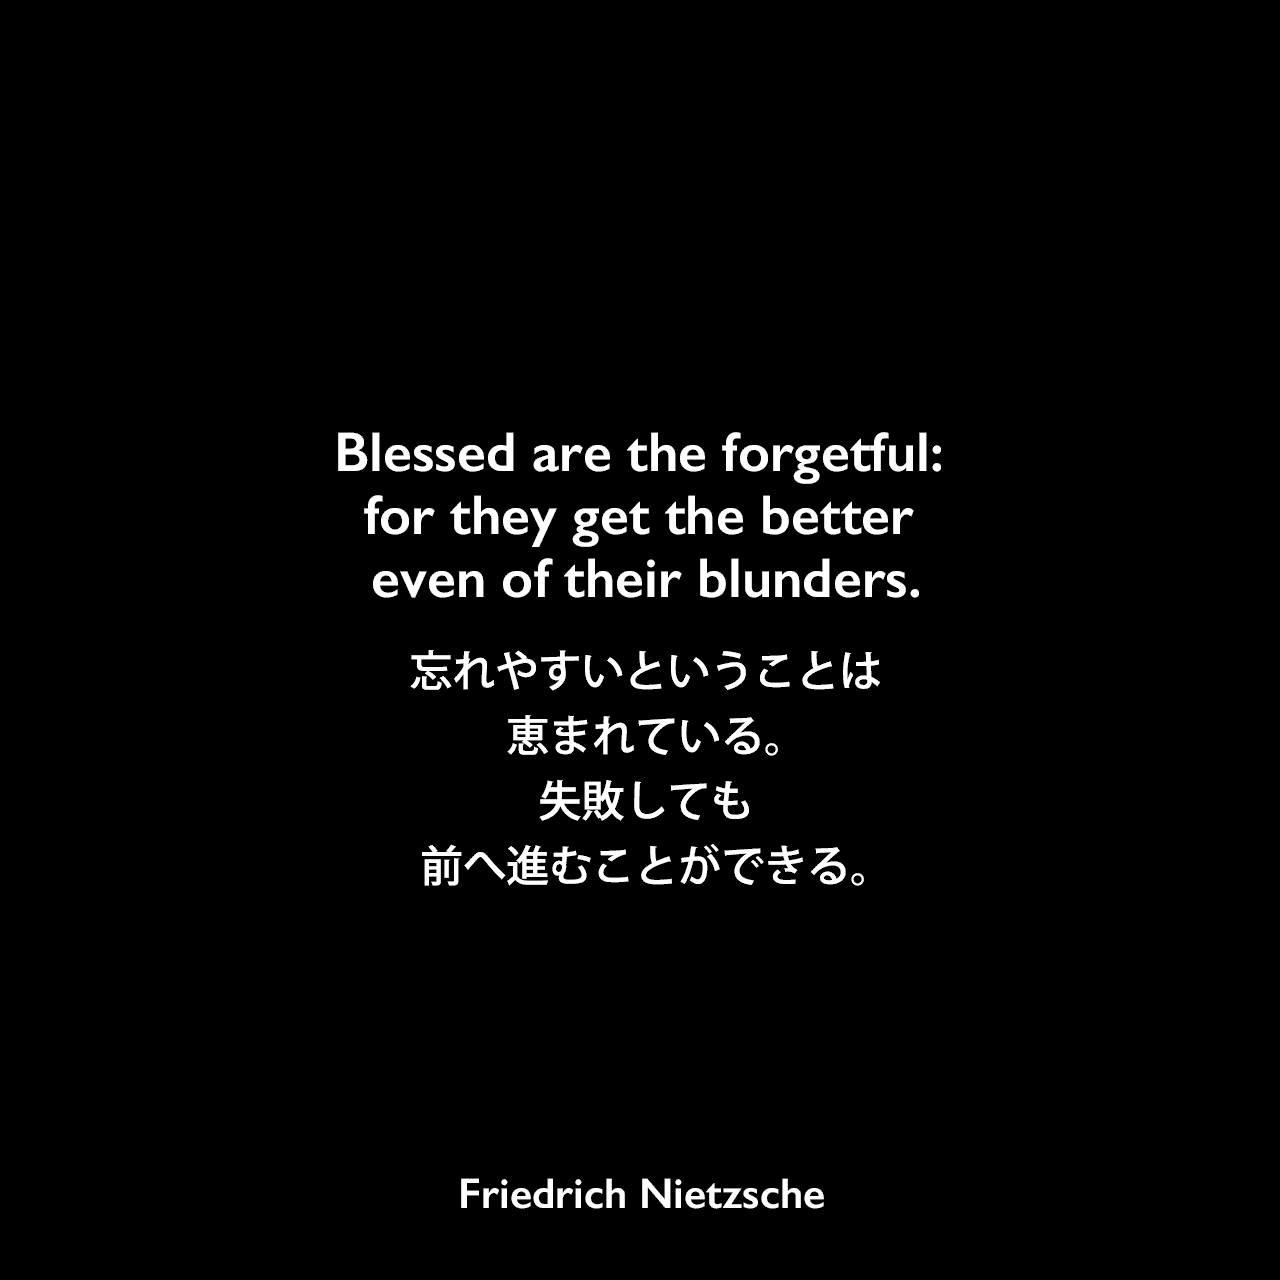 Blessed are the forgetful: for they get the better even of their blunders.忘れやすいということは恵まれている。失敗しても前へ進むことができる。- ニーチェの本 「善悪の彼岸」よりFriedrich Nietzsche